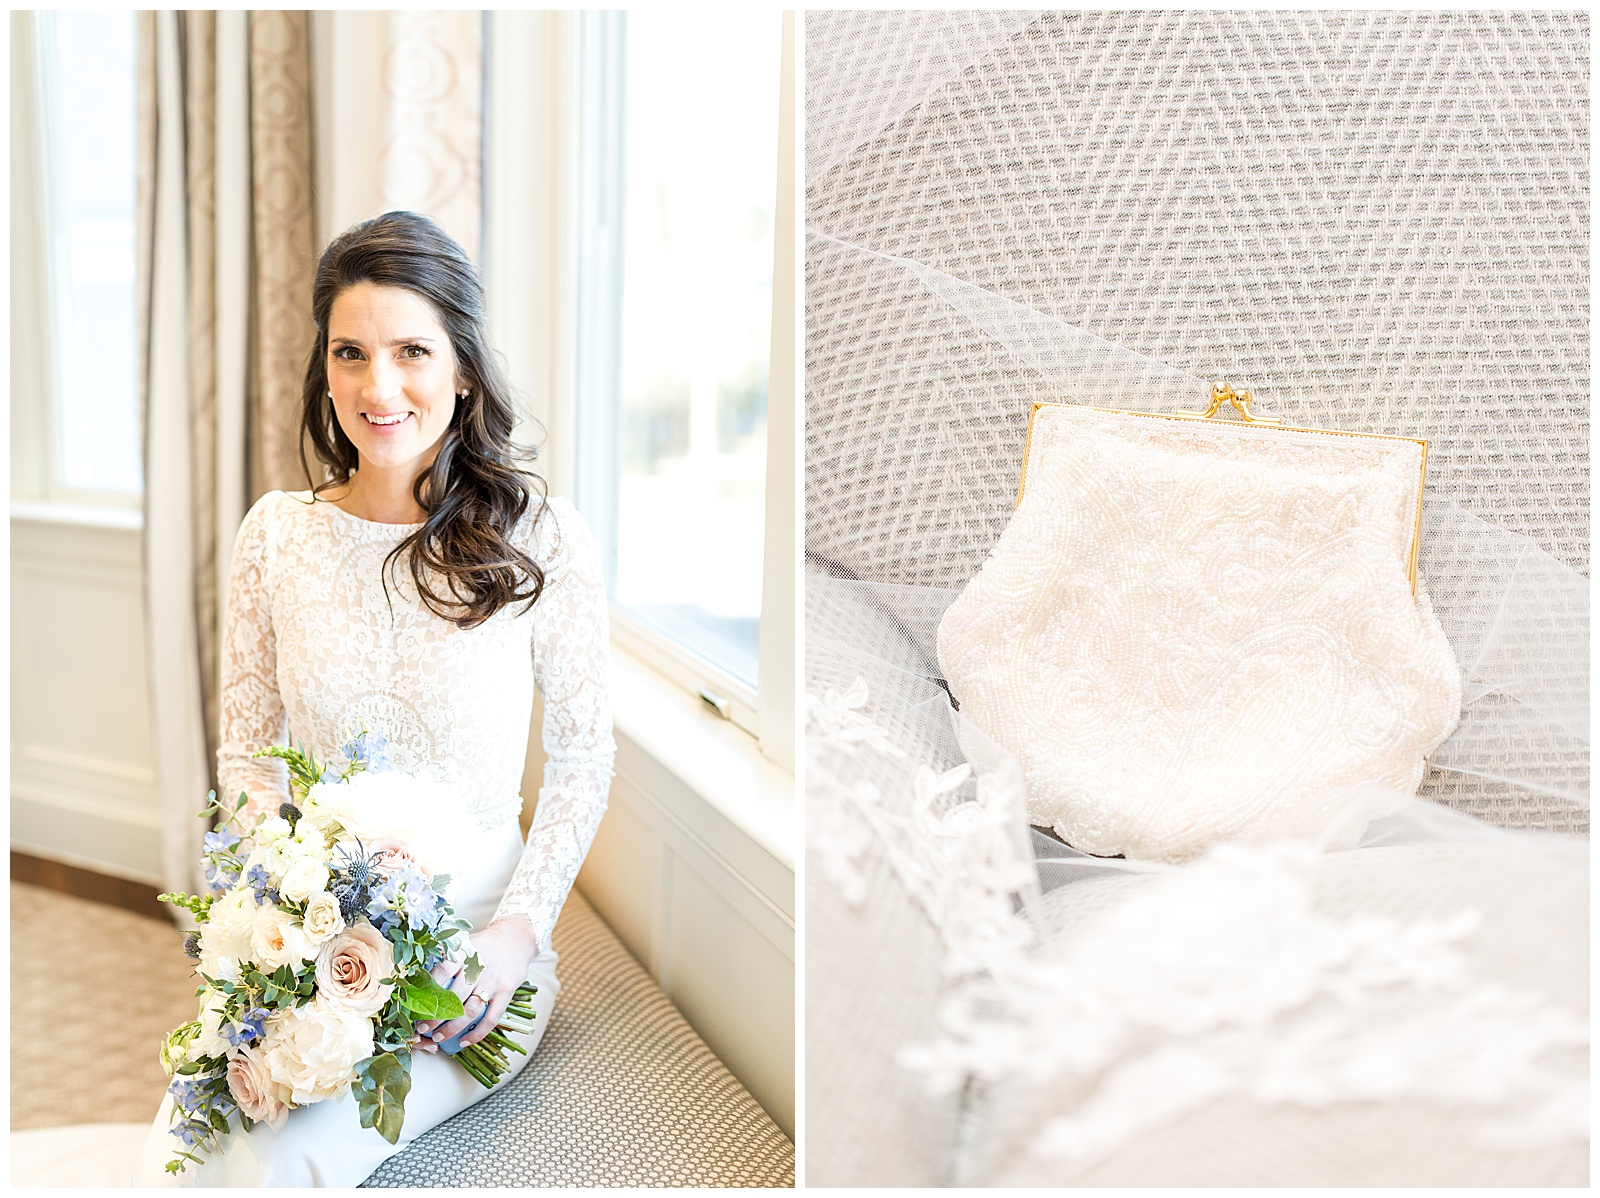 Bride poses with her bouquet and heirloom clutch before her wedding